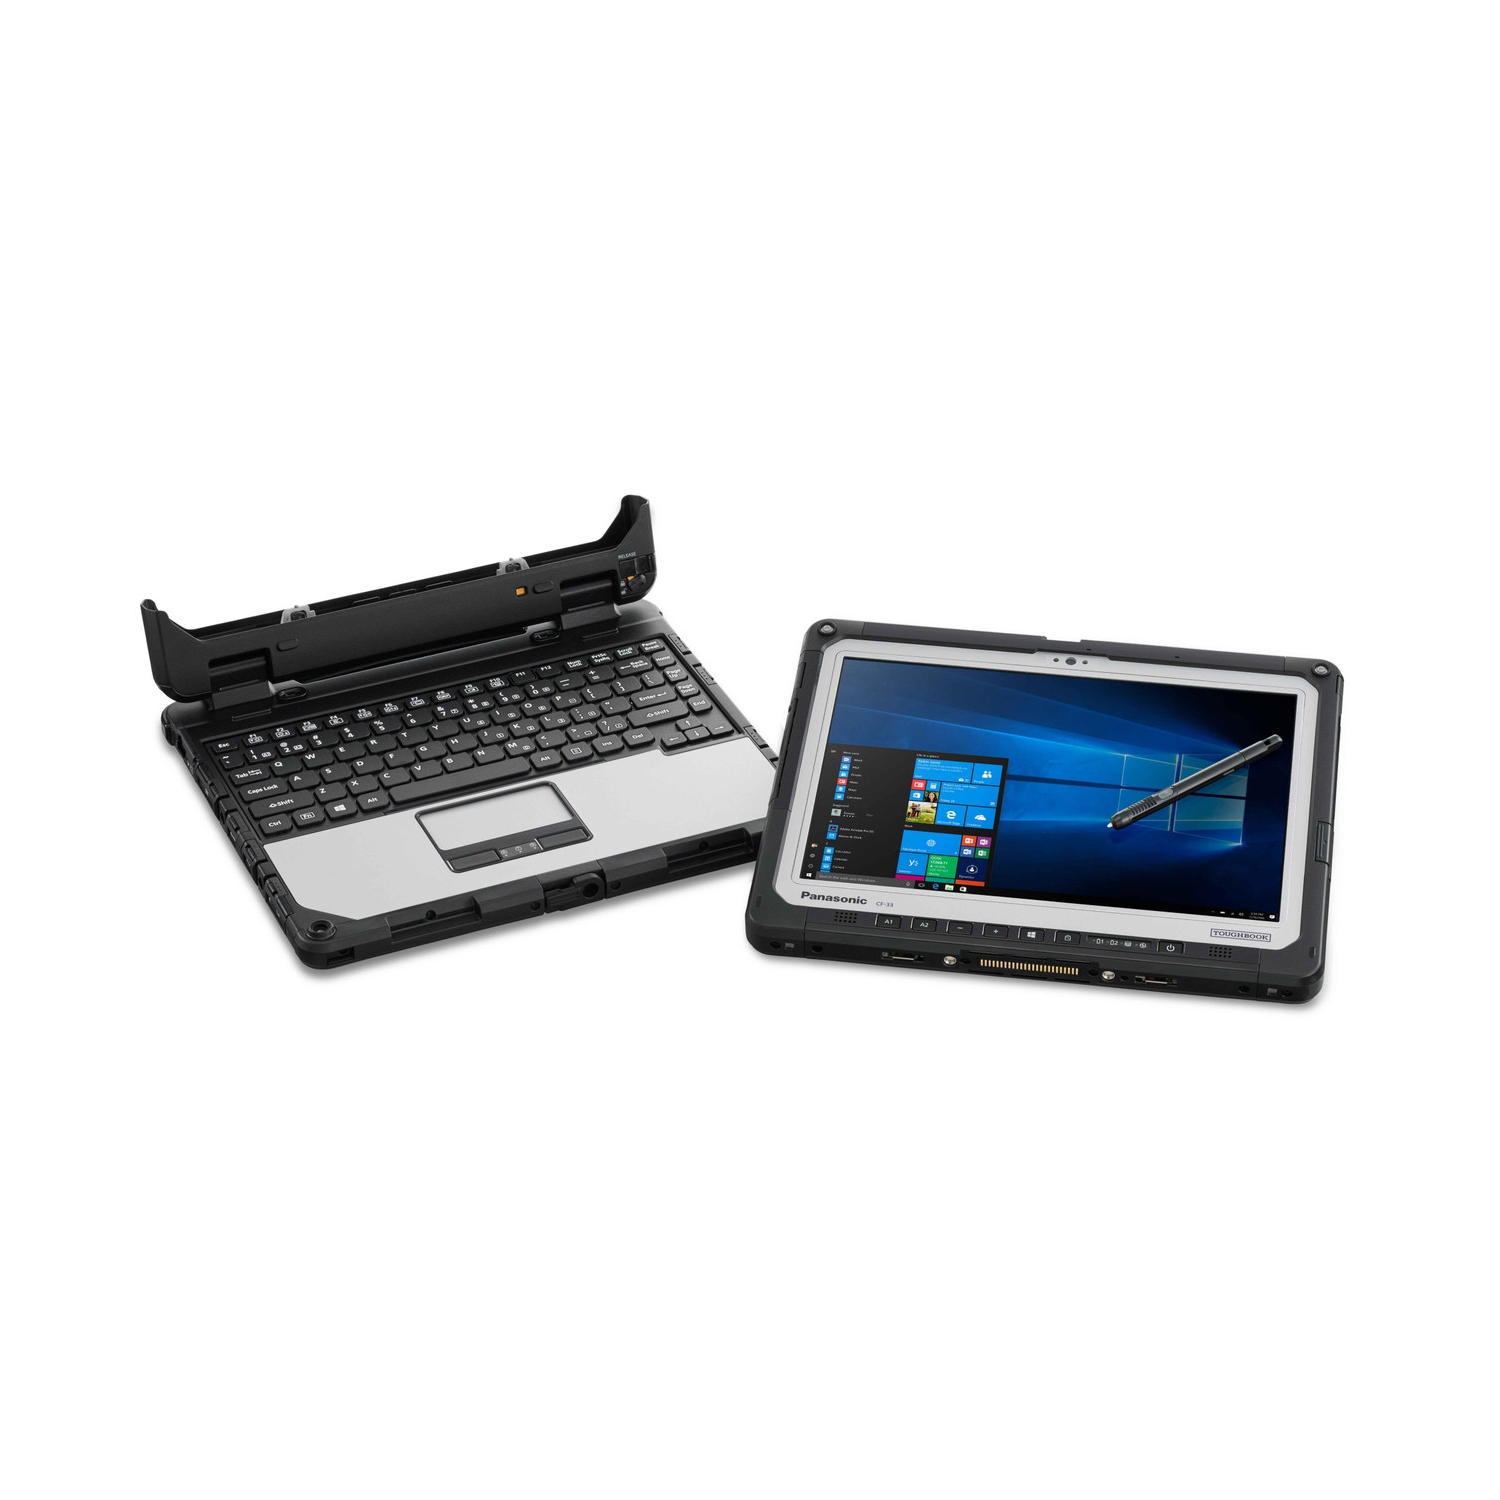 Refurbished (Excellent) – Fully Rugged Panasonic Toughbook CF-33 Tablet / Intel® Core™ i5-6300U 2.4GHz / 8GB / 1TB SSD / 4G LTE / 12" QHD / Webcam / Win 10 Pro / 3-Year Warranty